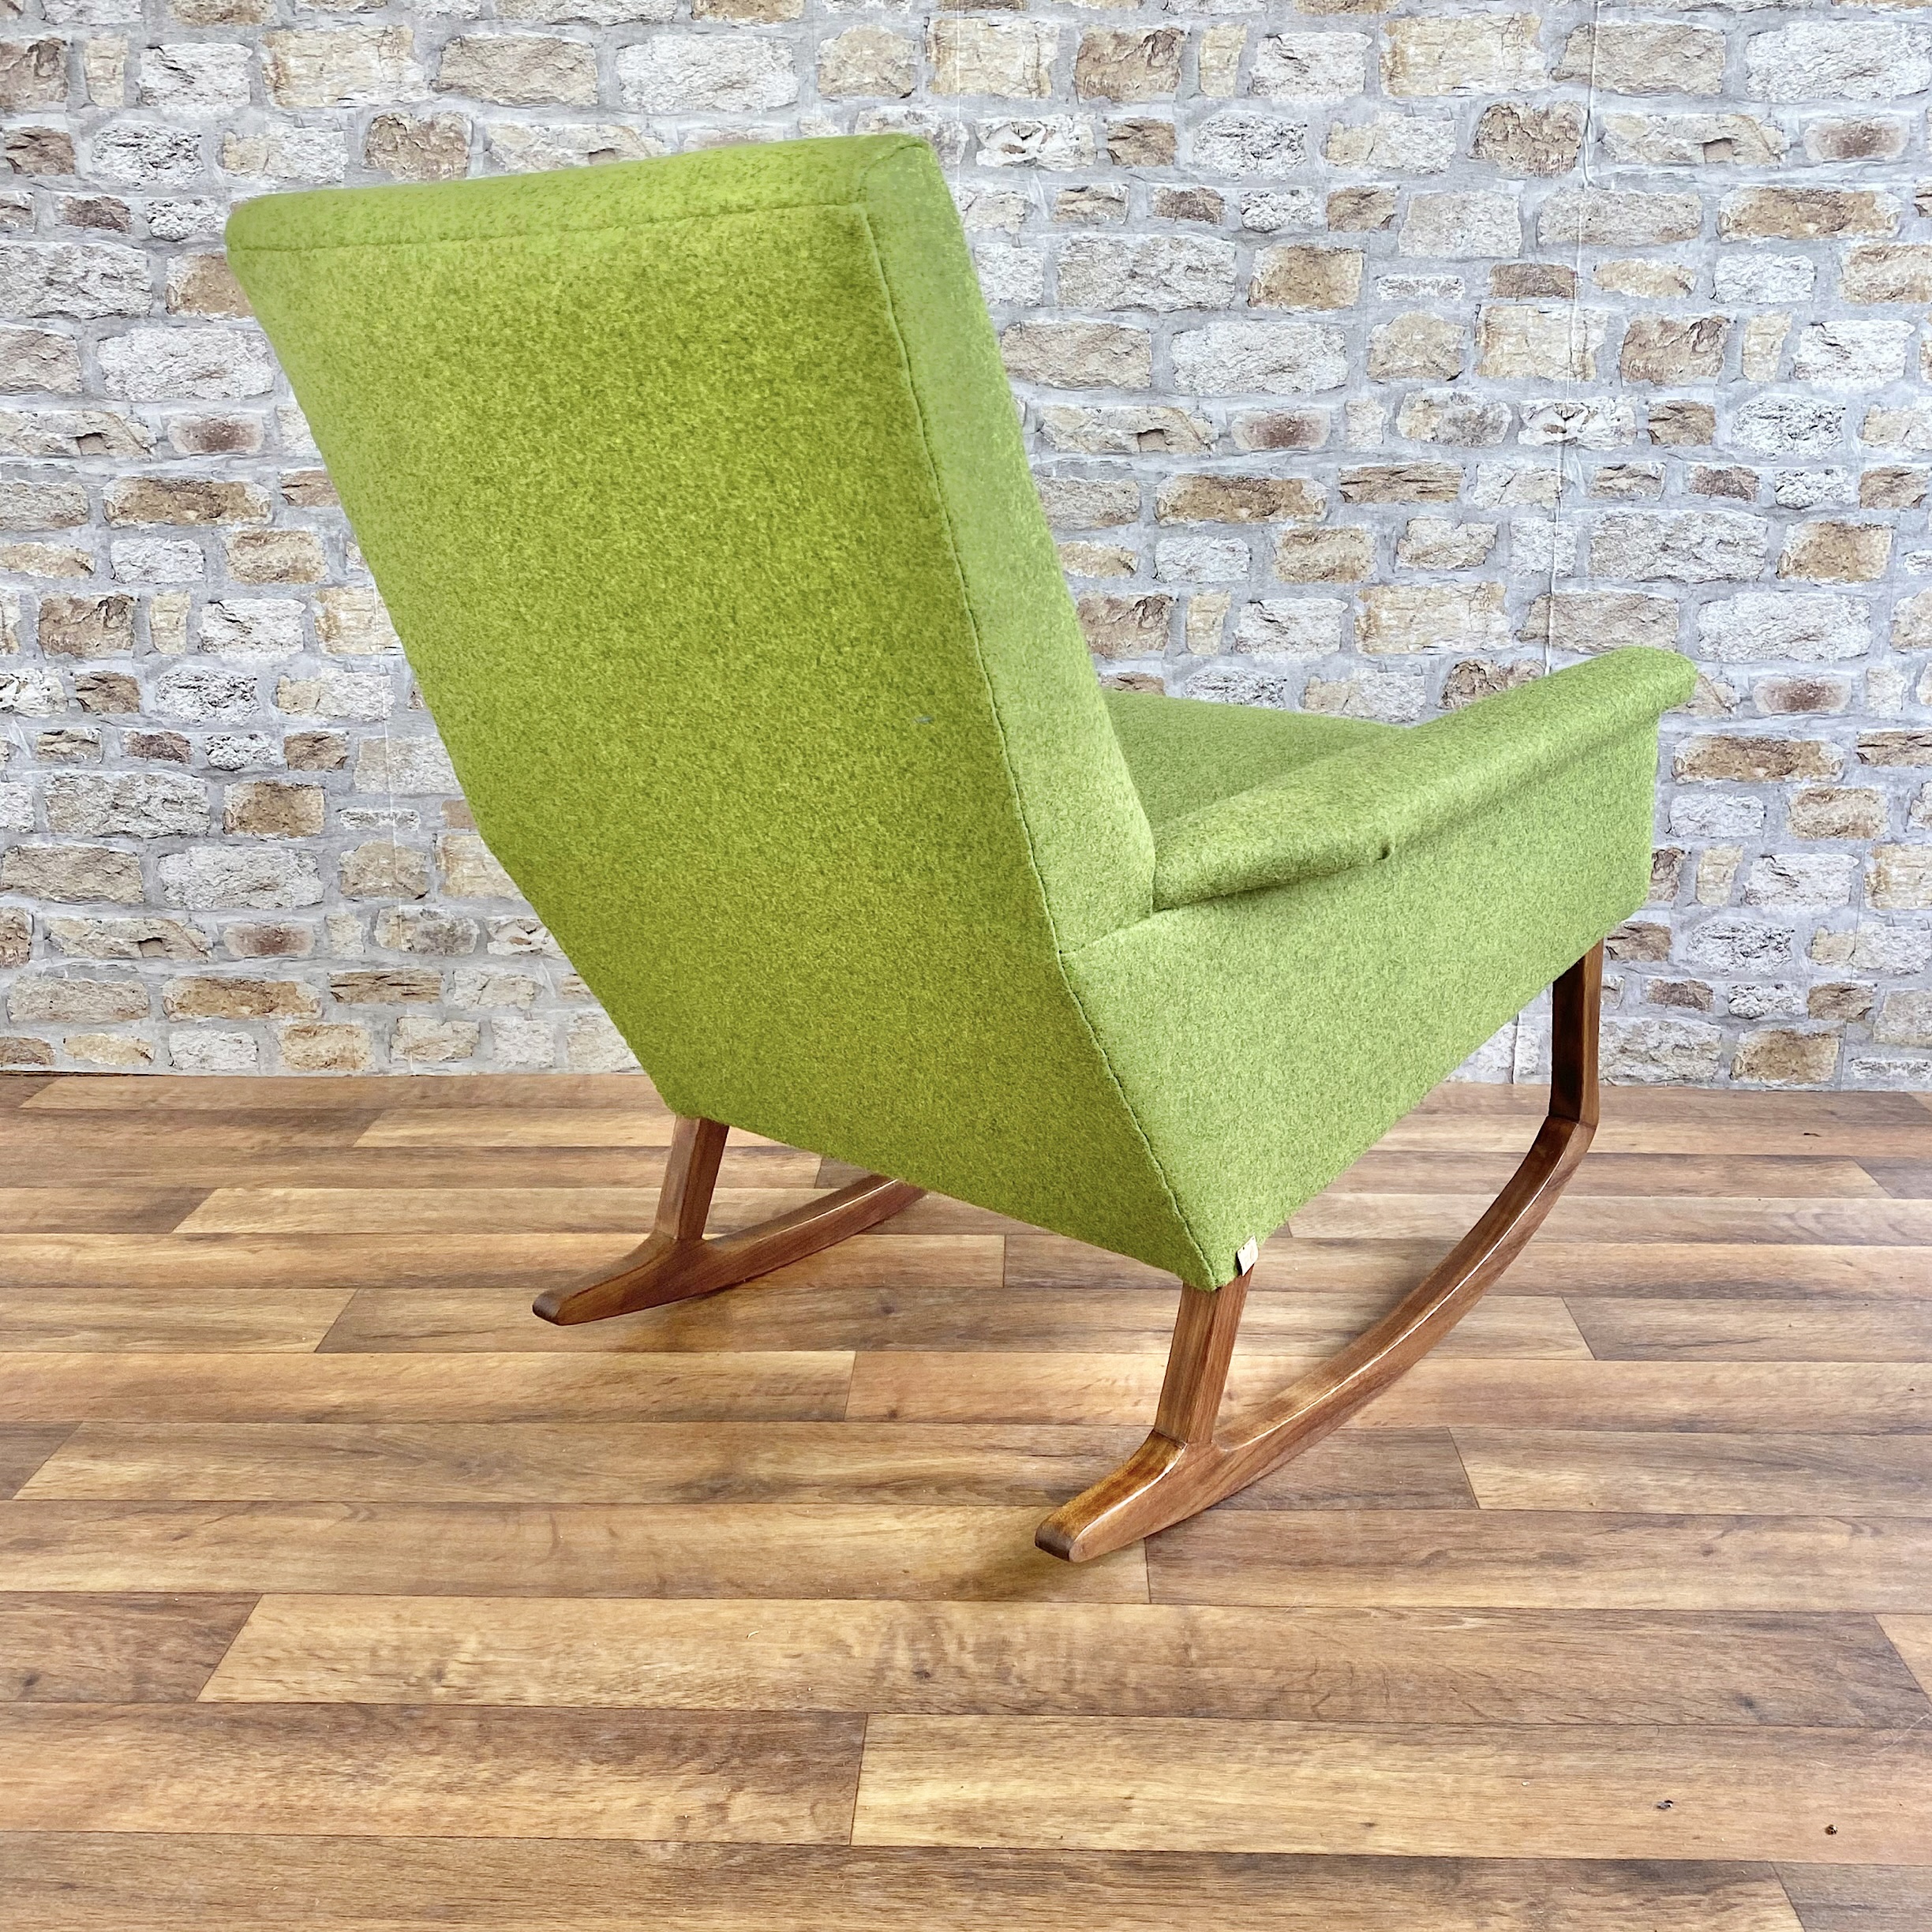 Afromosia Mid Century Rocking Chair